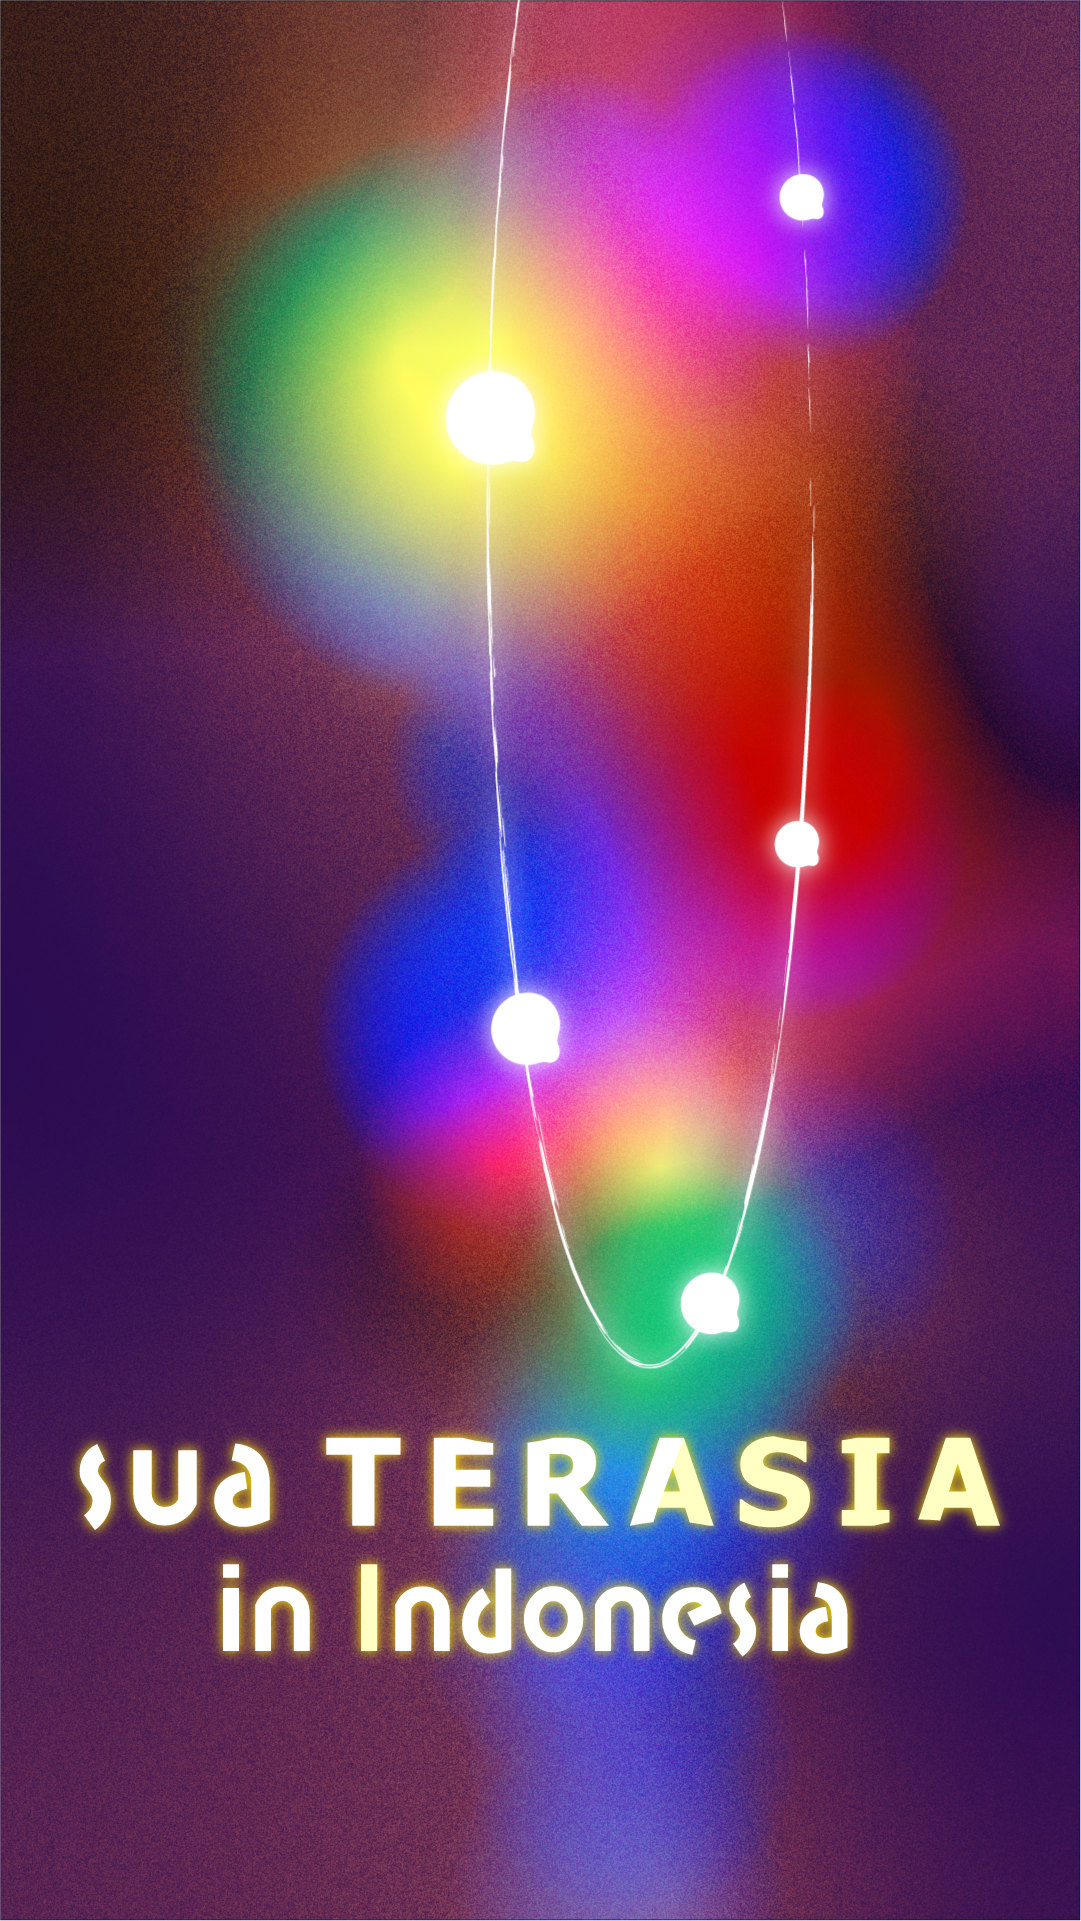 Transnational art festival “Sua TERASIA” to be held in January 2024